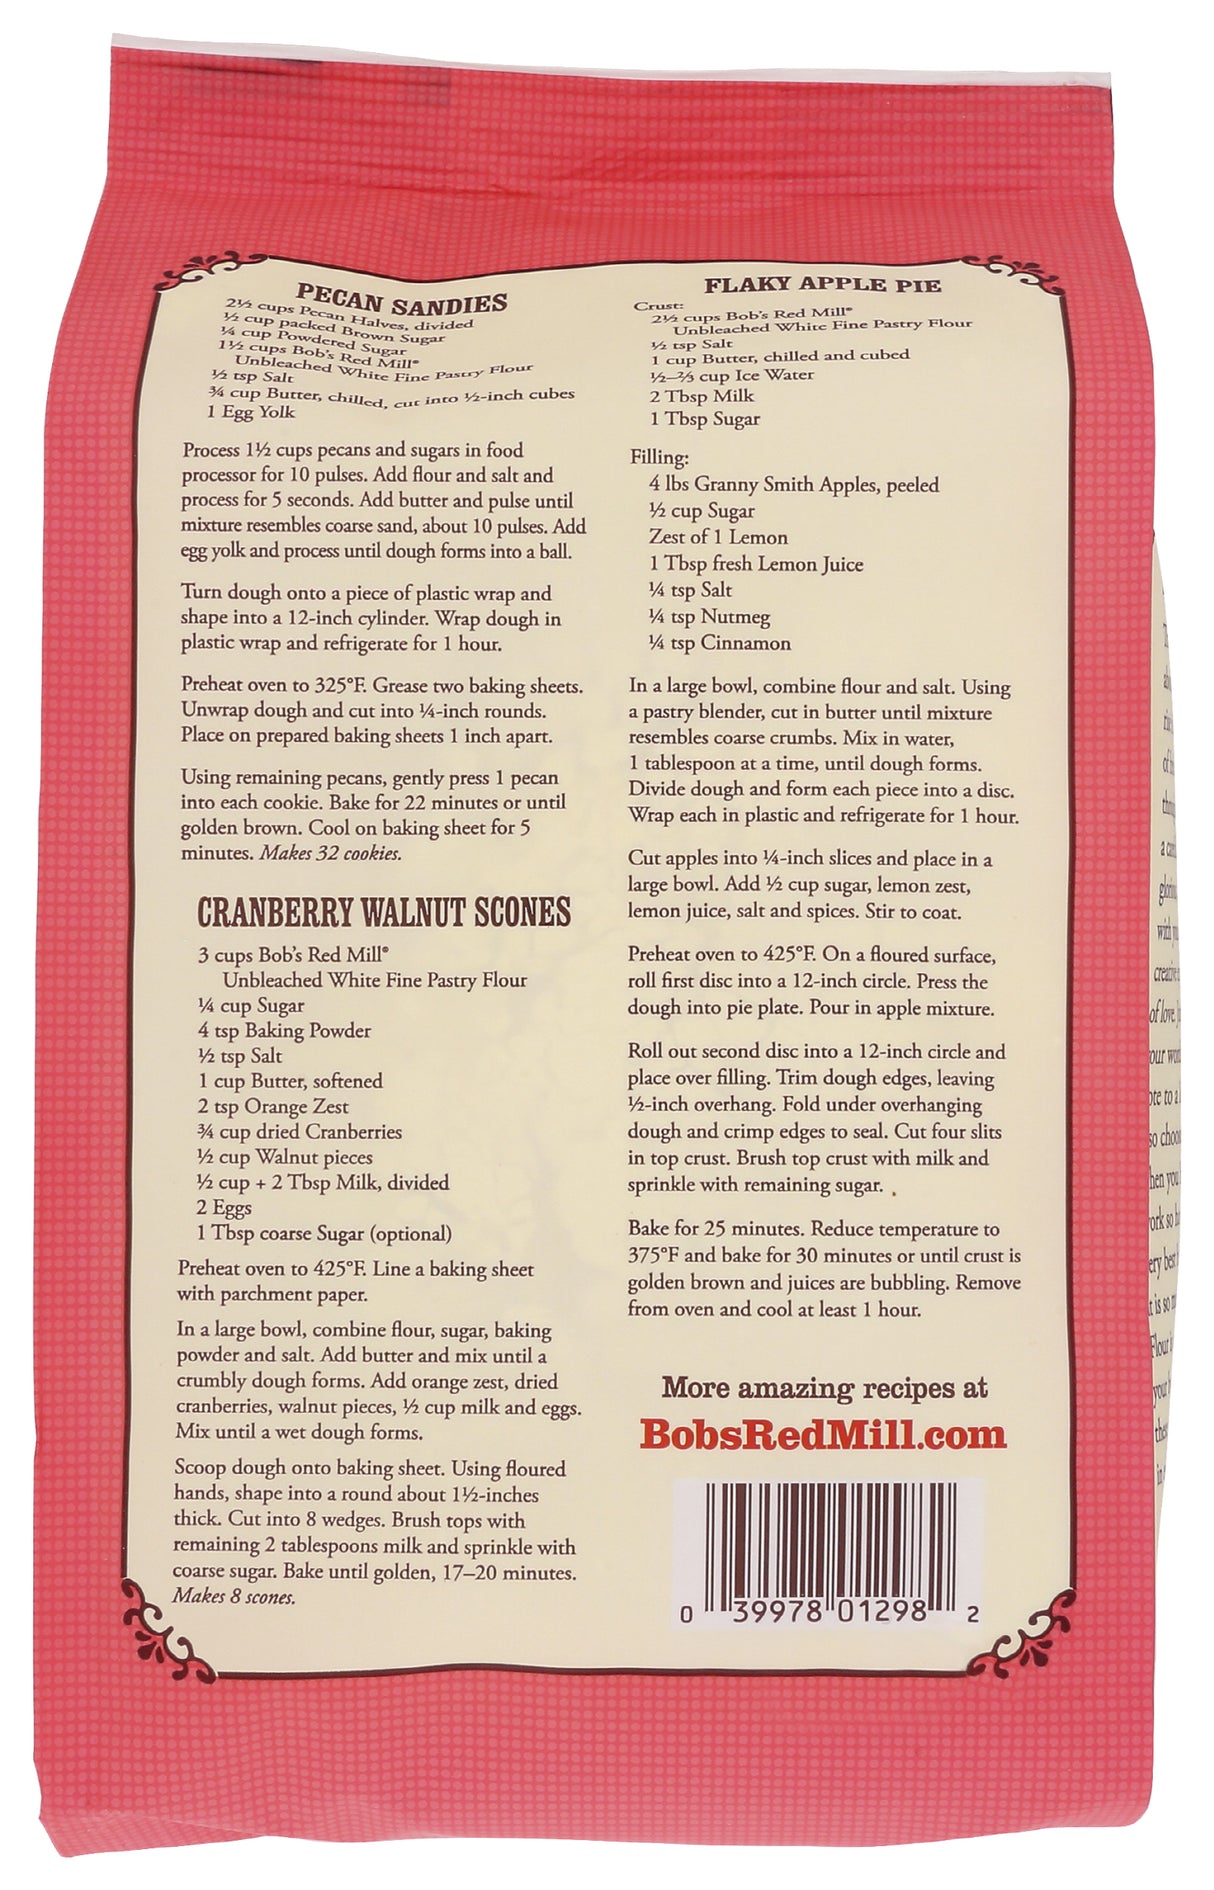 Bob's Red Mill Unbleached White Fine Pastry Flour, 5 Pound (Pack of 4)